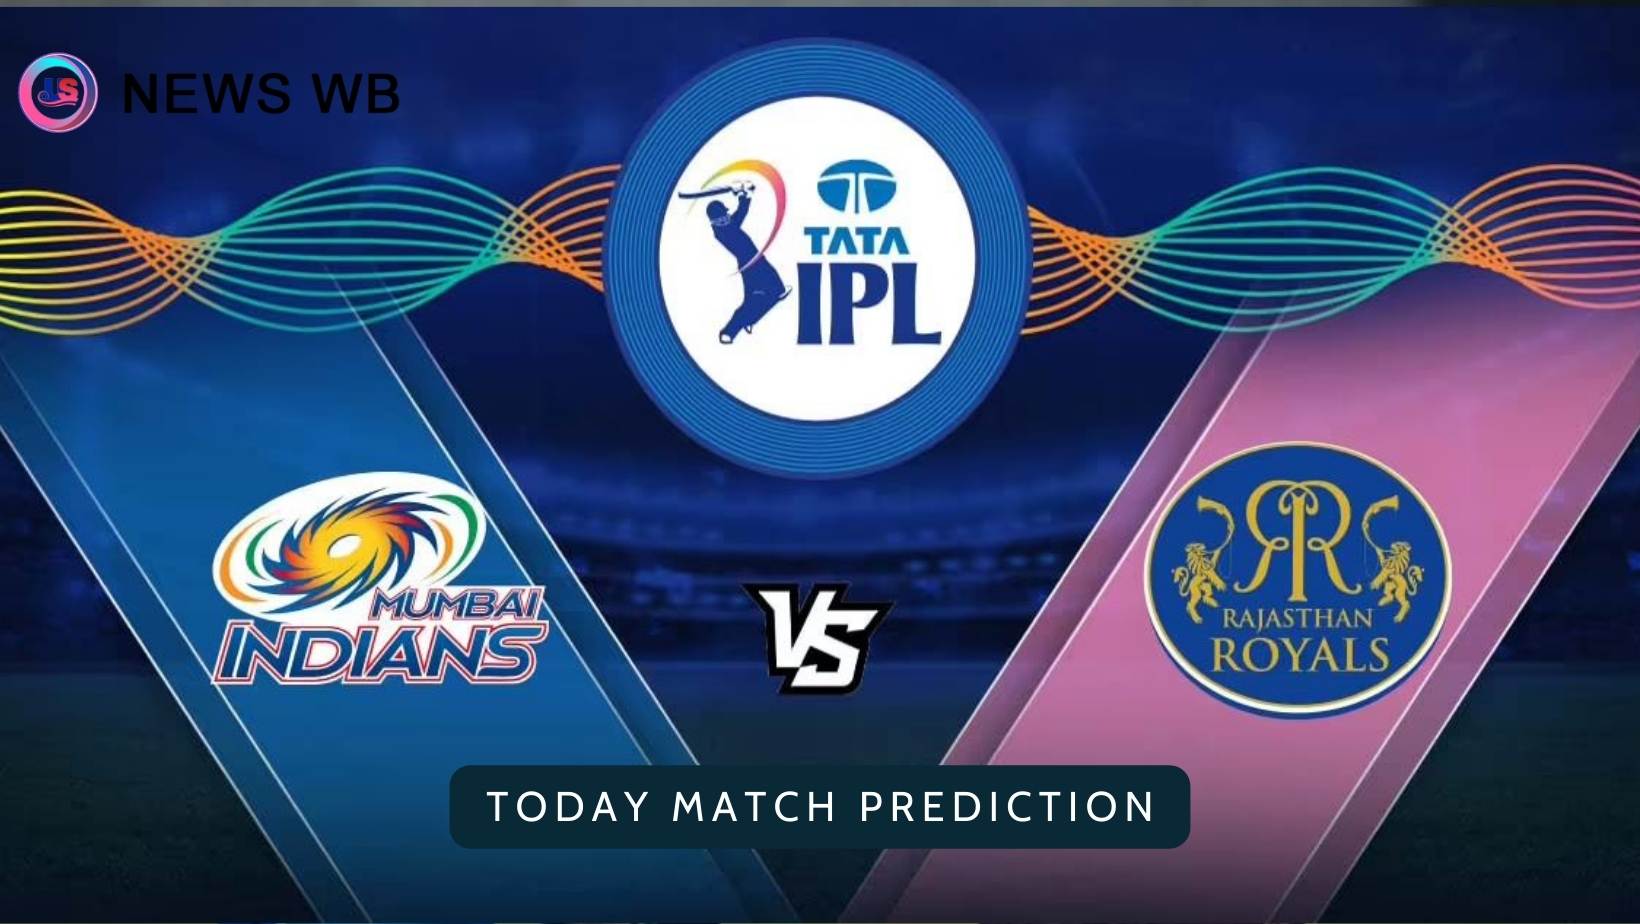 Today Match Prediction: MI vs RR Dream11 Team, Mumbai Indians vs Rajasthan Royals 14th Match, Who Will Win?